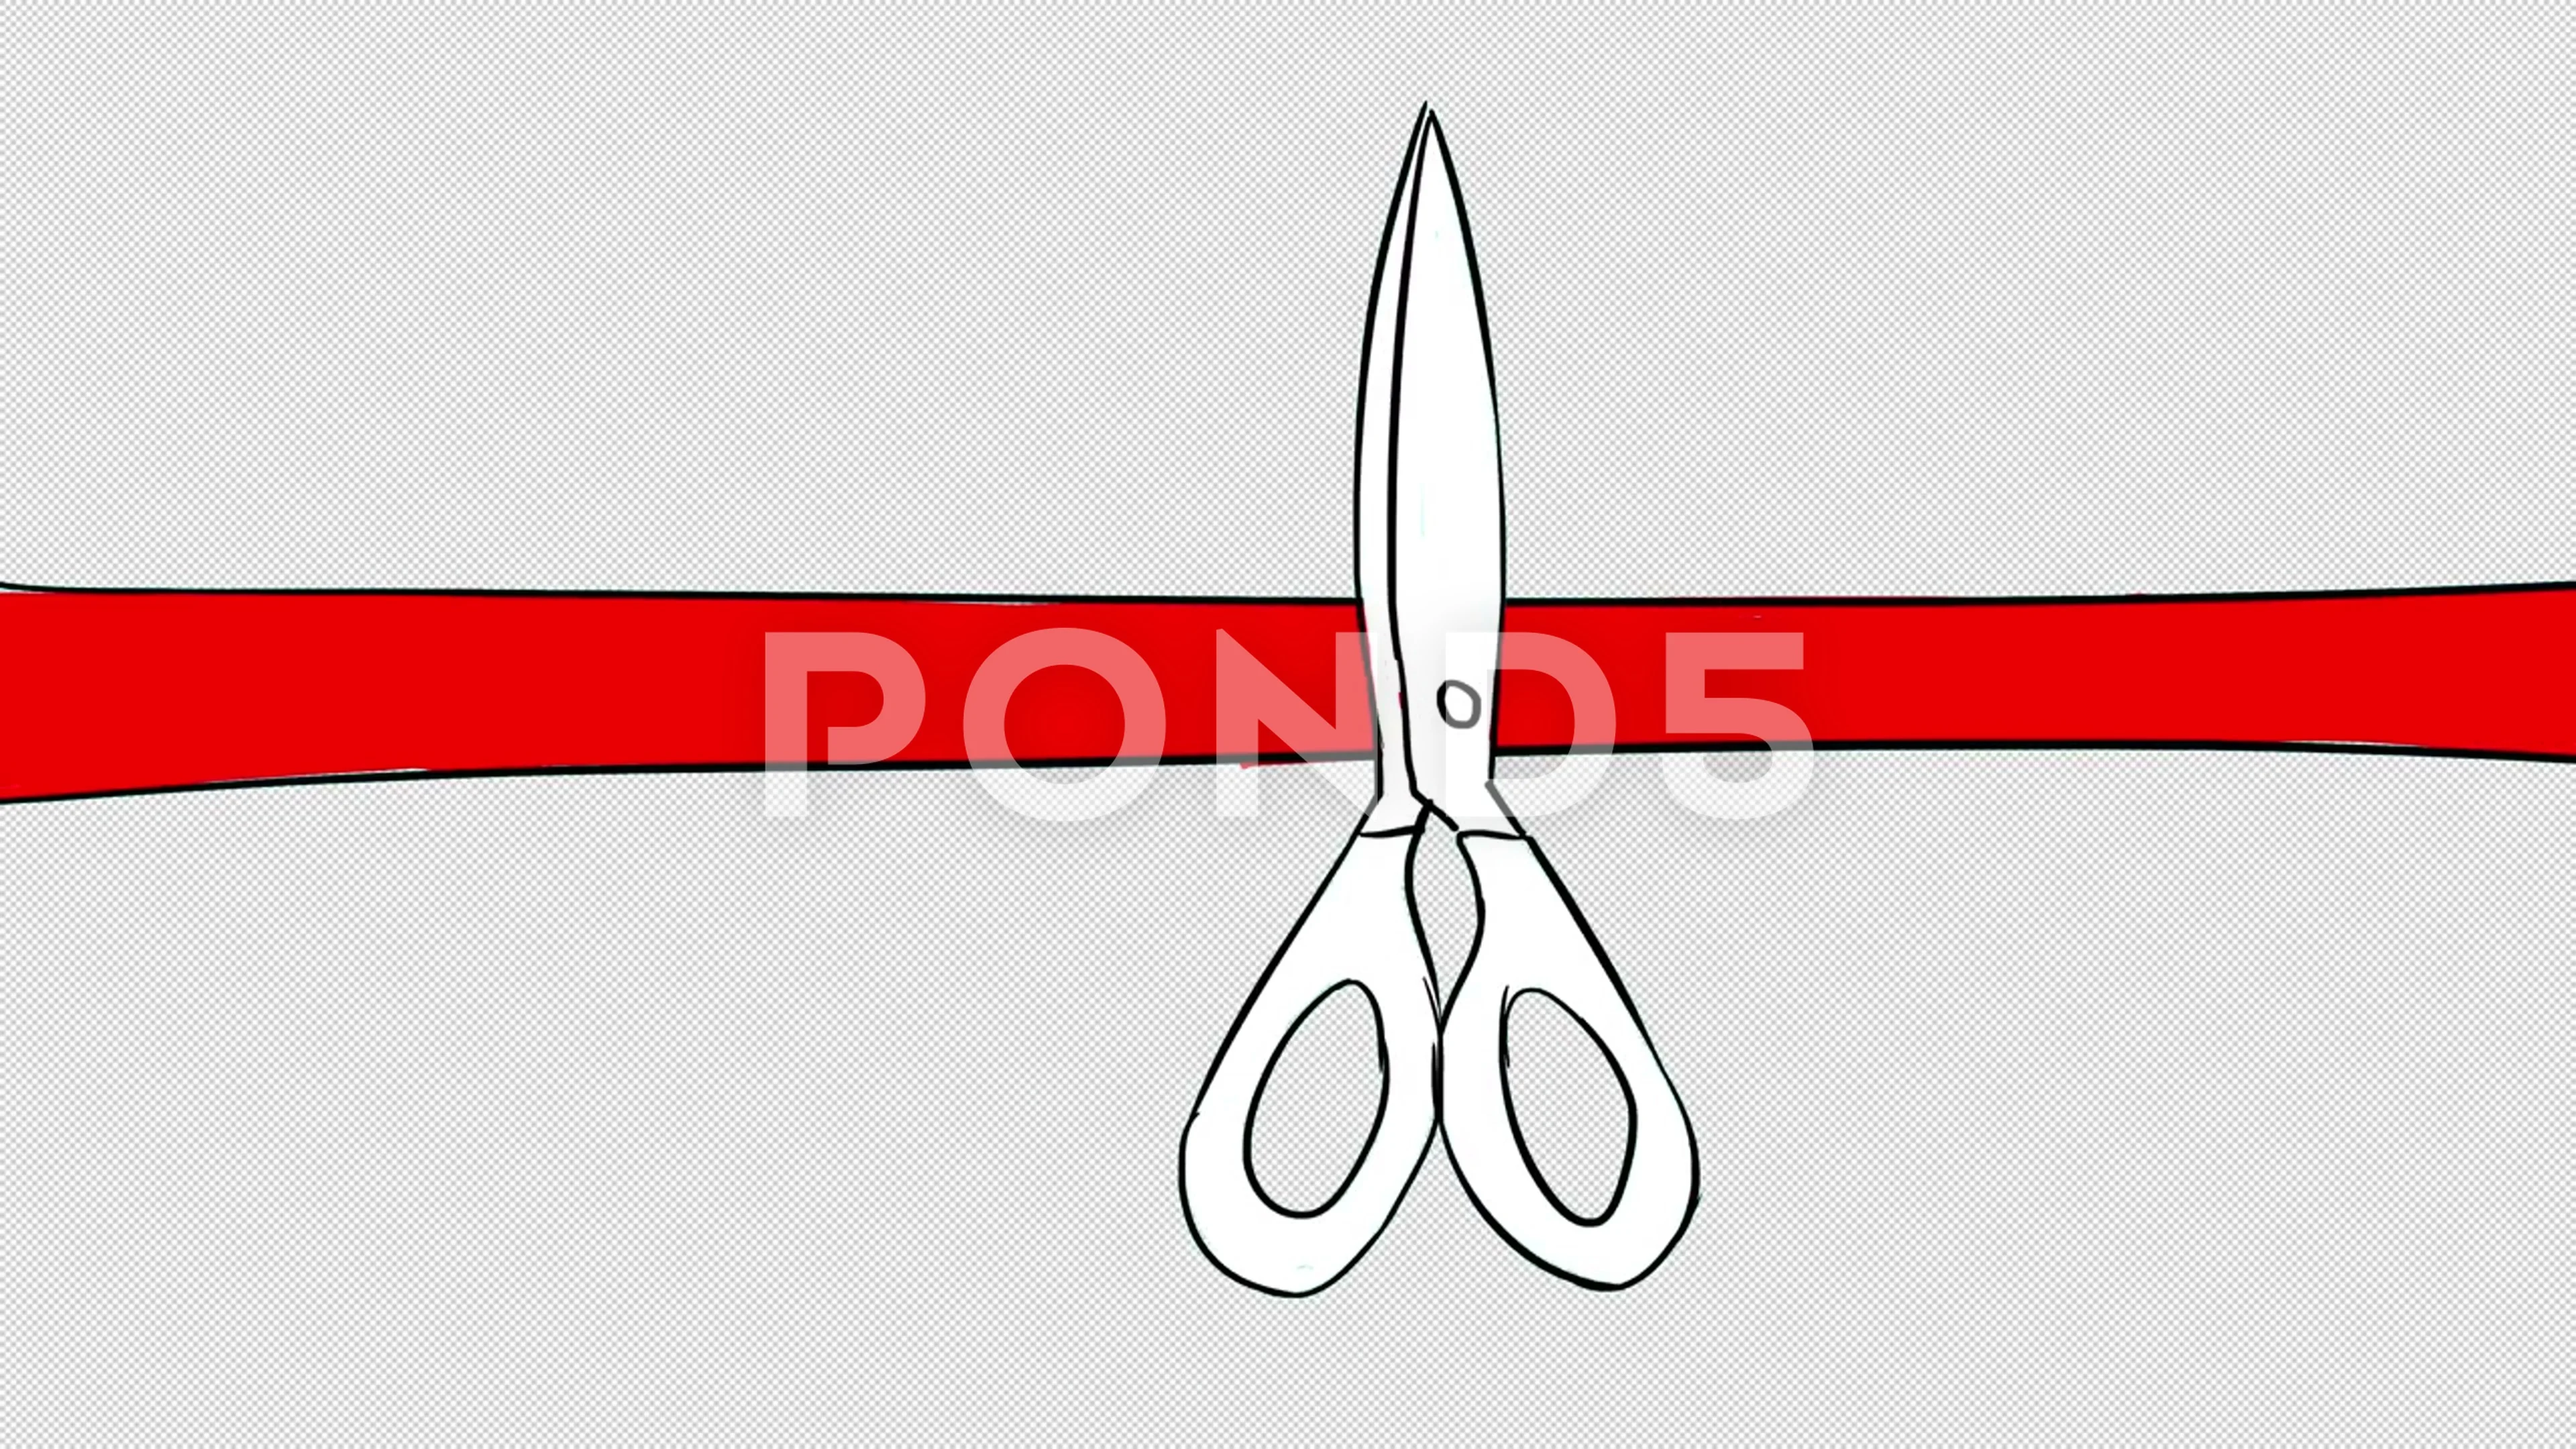 Ribbon Cutting Stock Footage ~ Royalty Free Stock Videos | Pond5